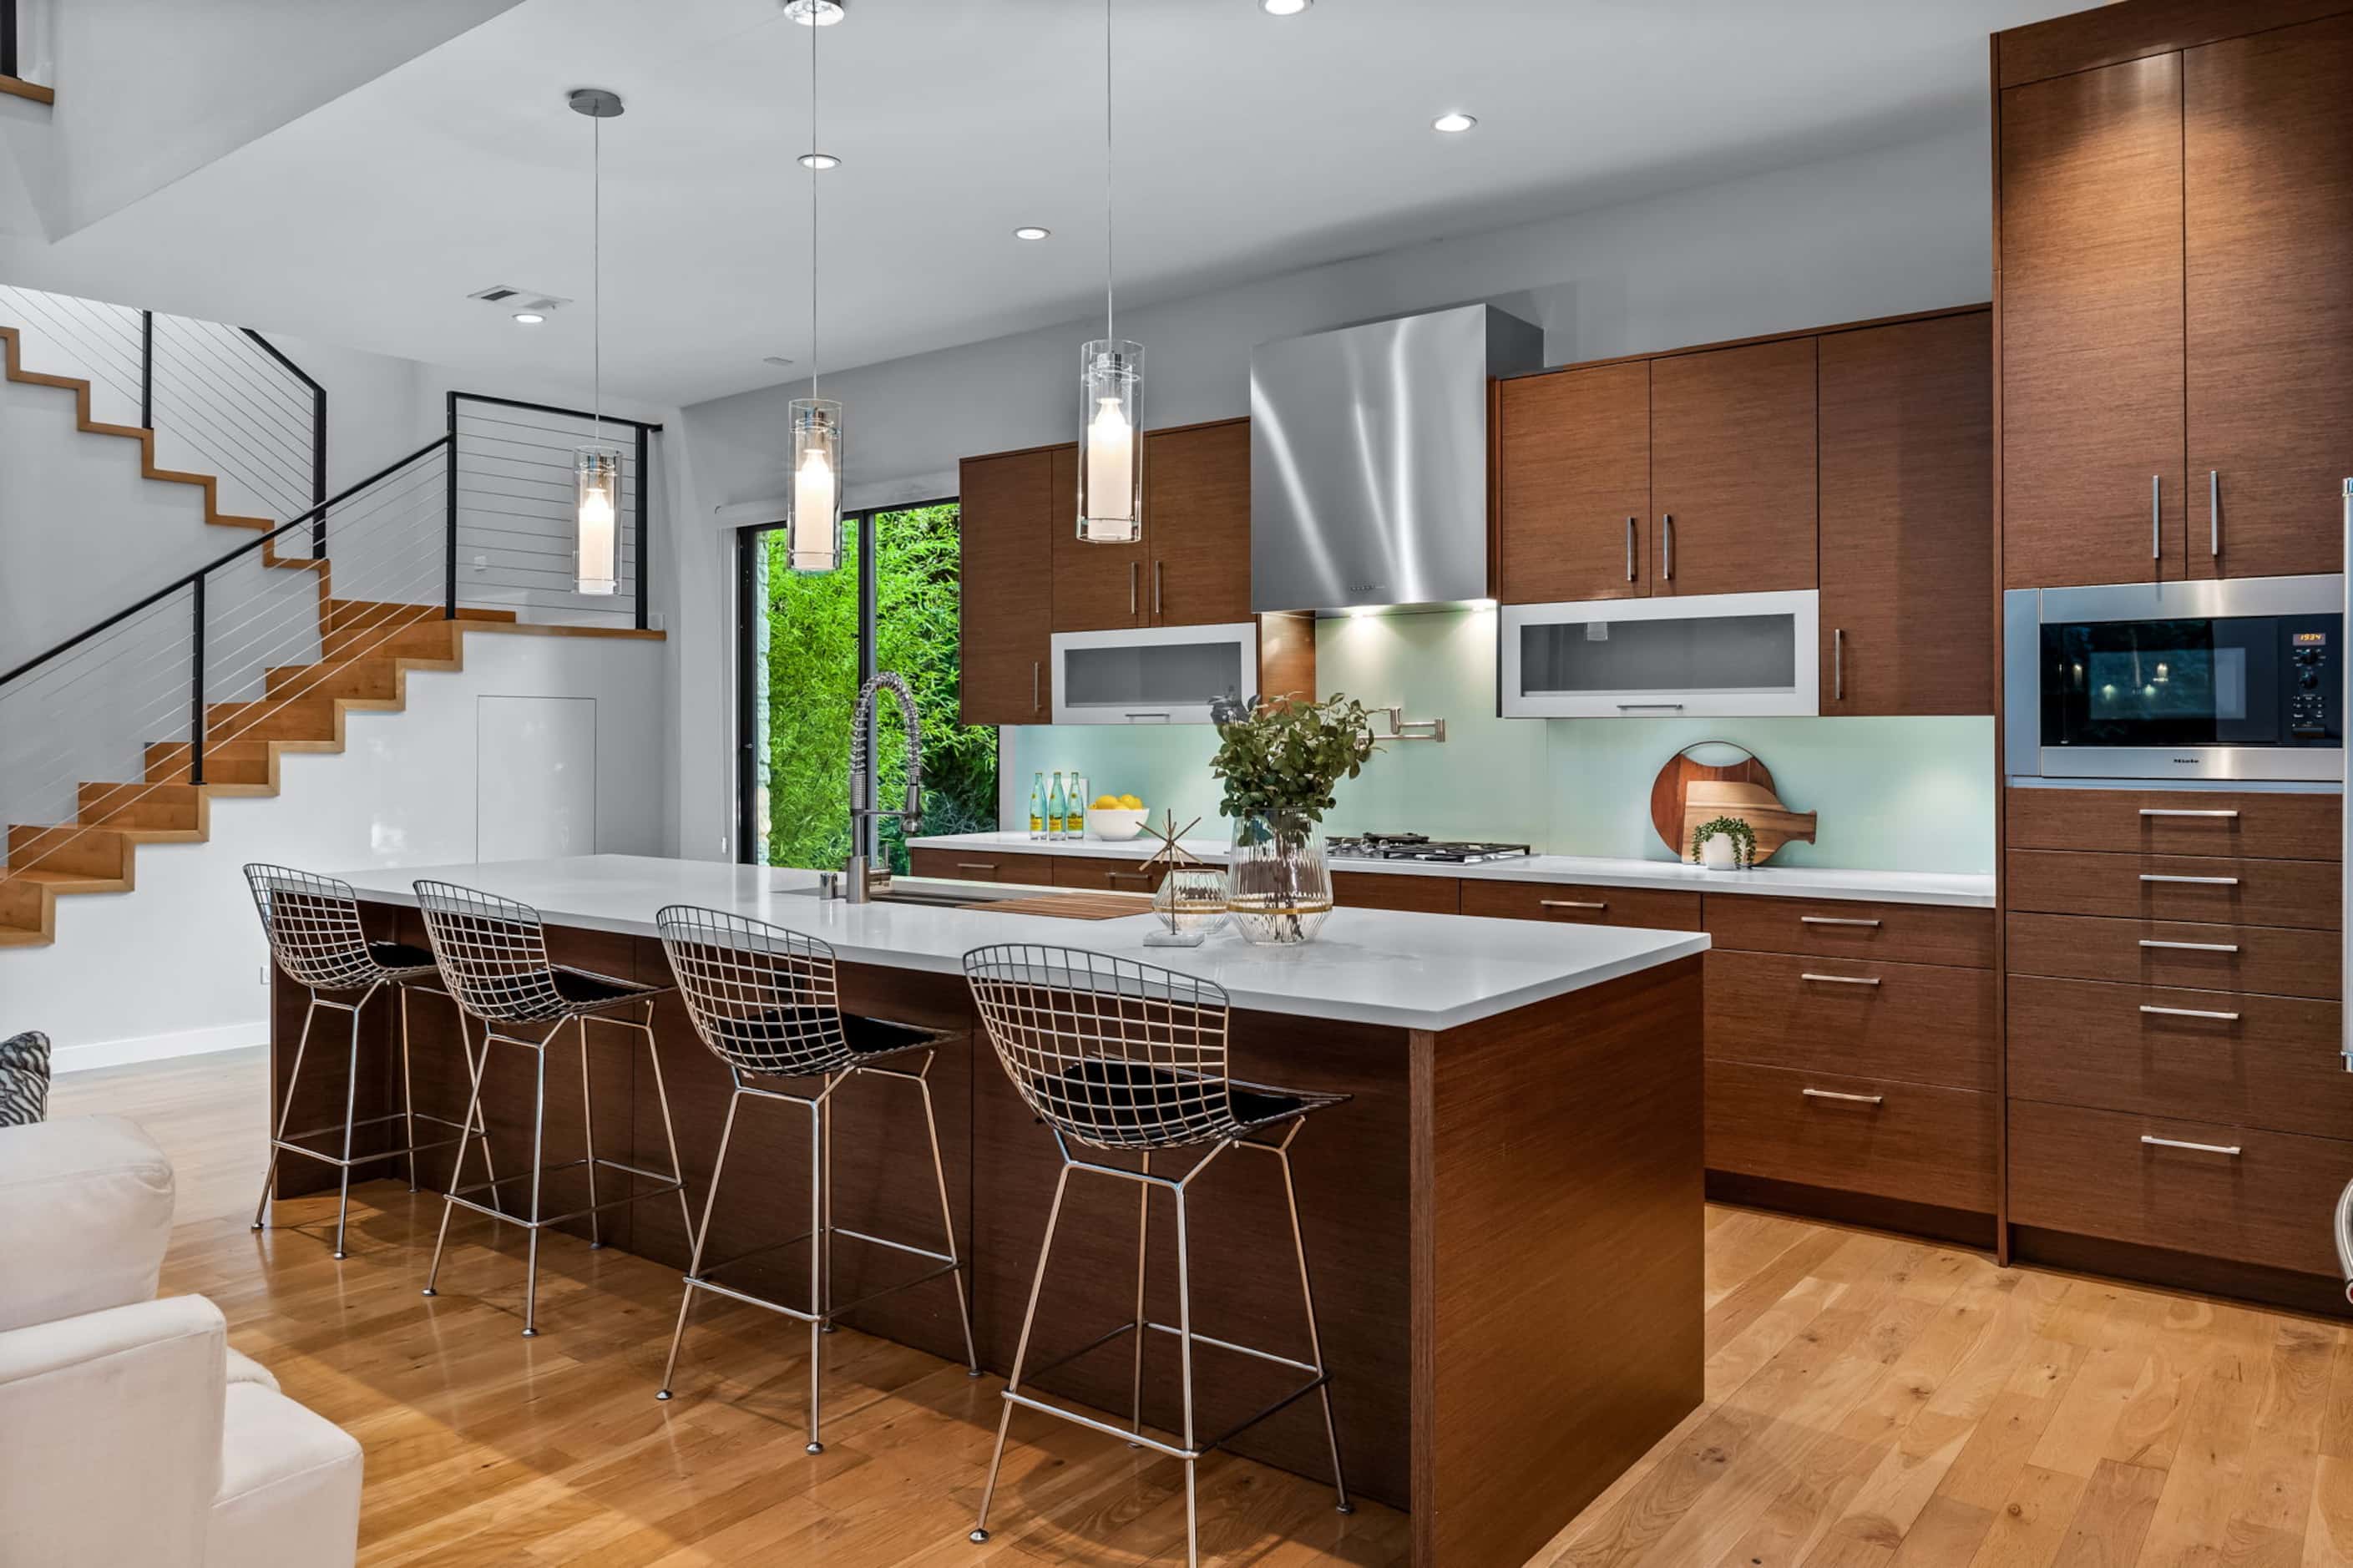 Contemporary kitchen, large island, wood cabinets